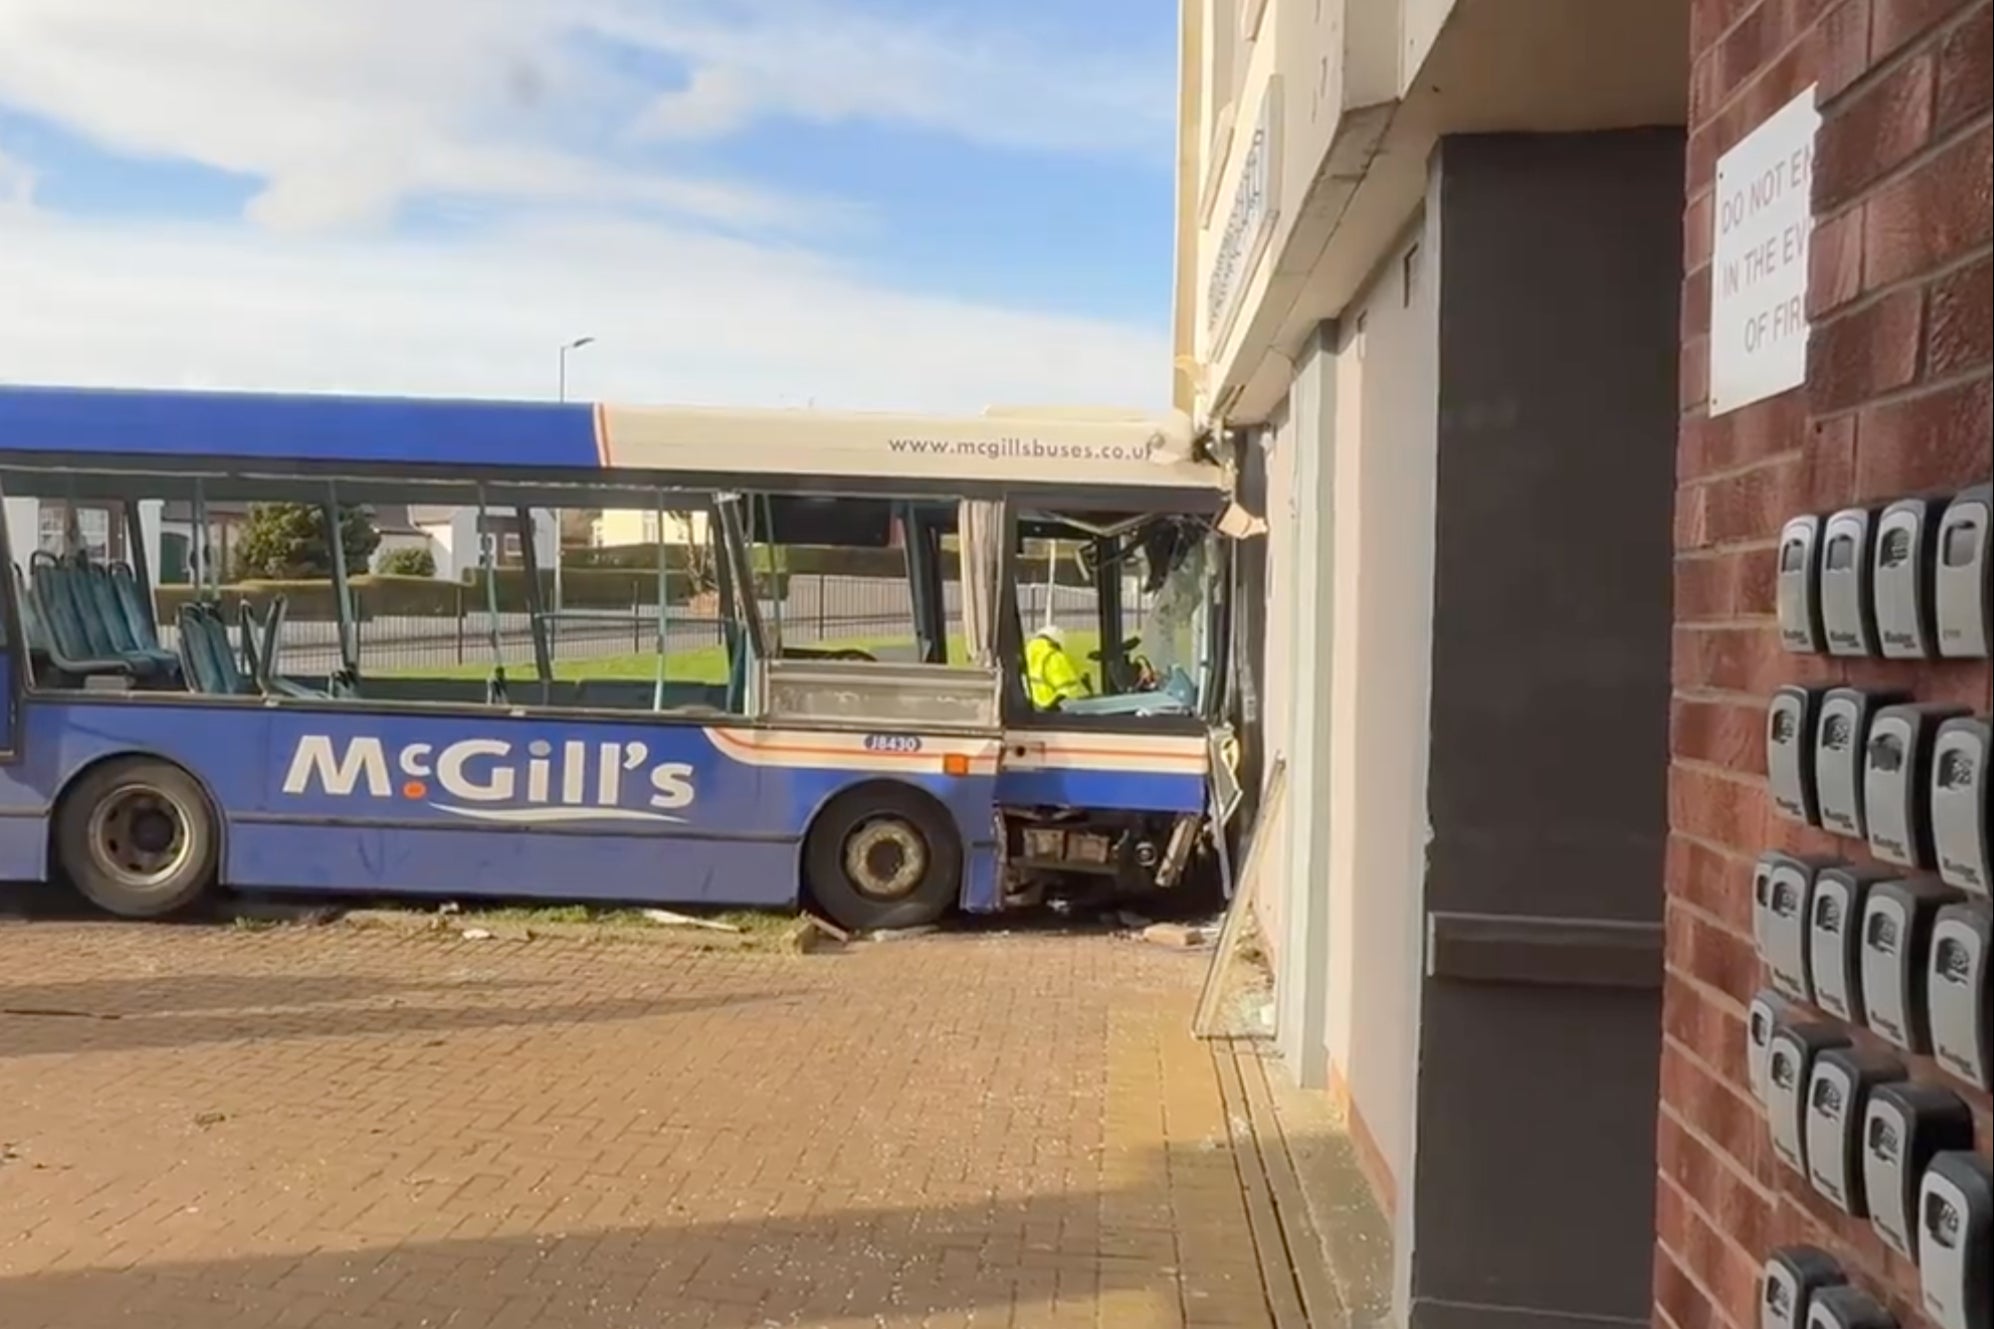 A bus has crashed into a block of flats in Paisley